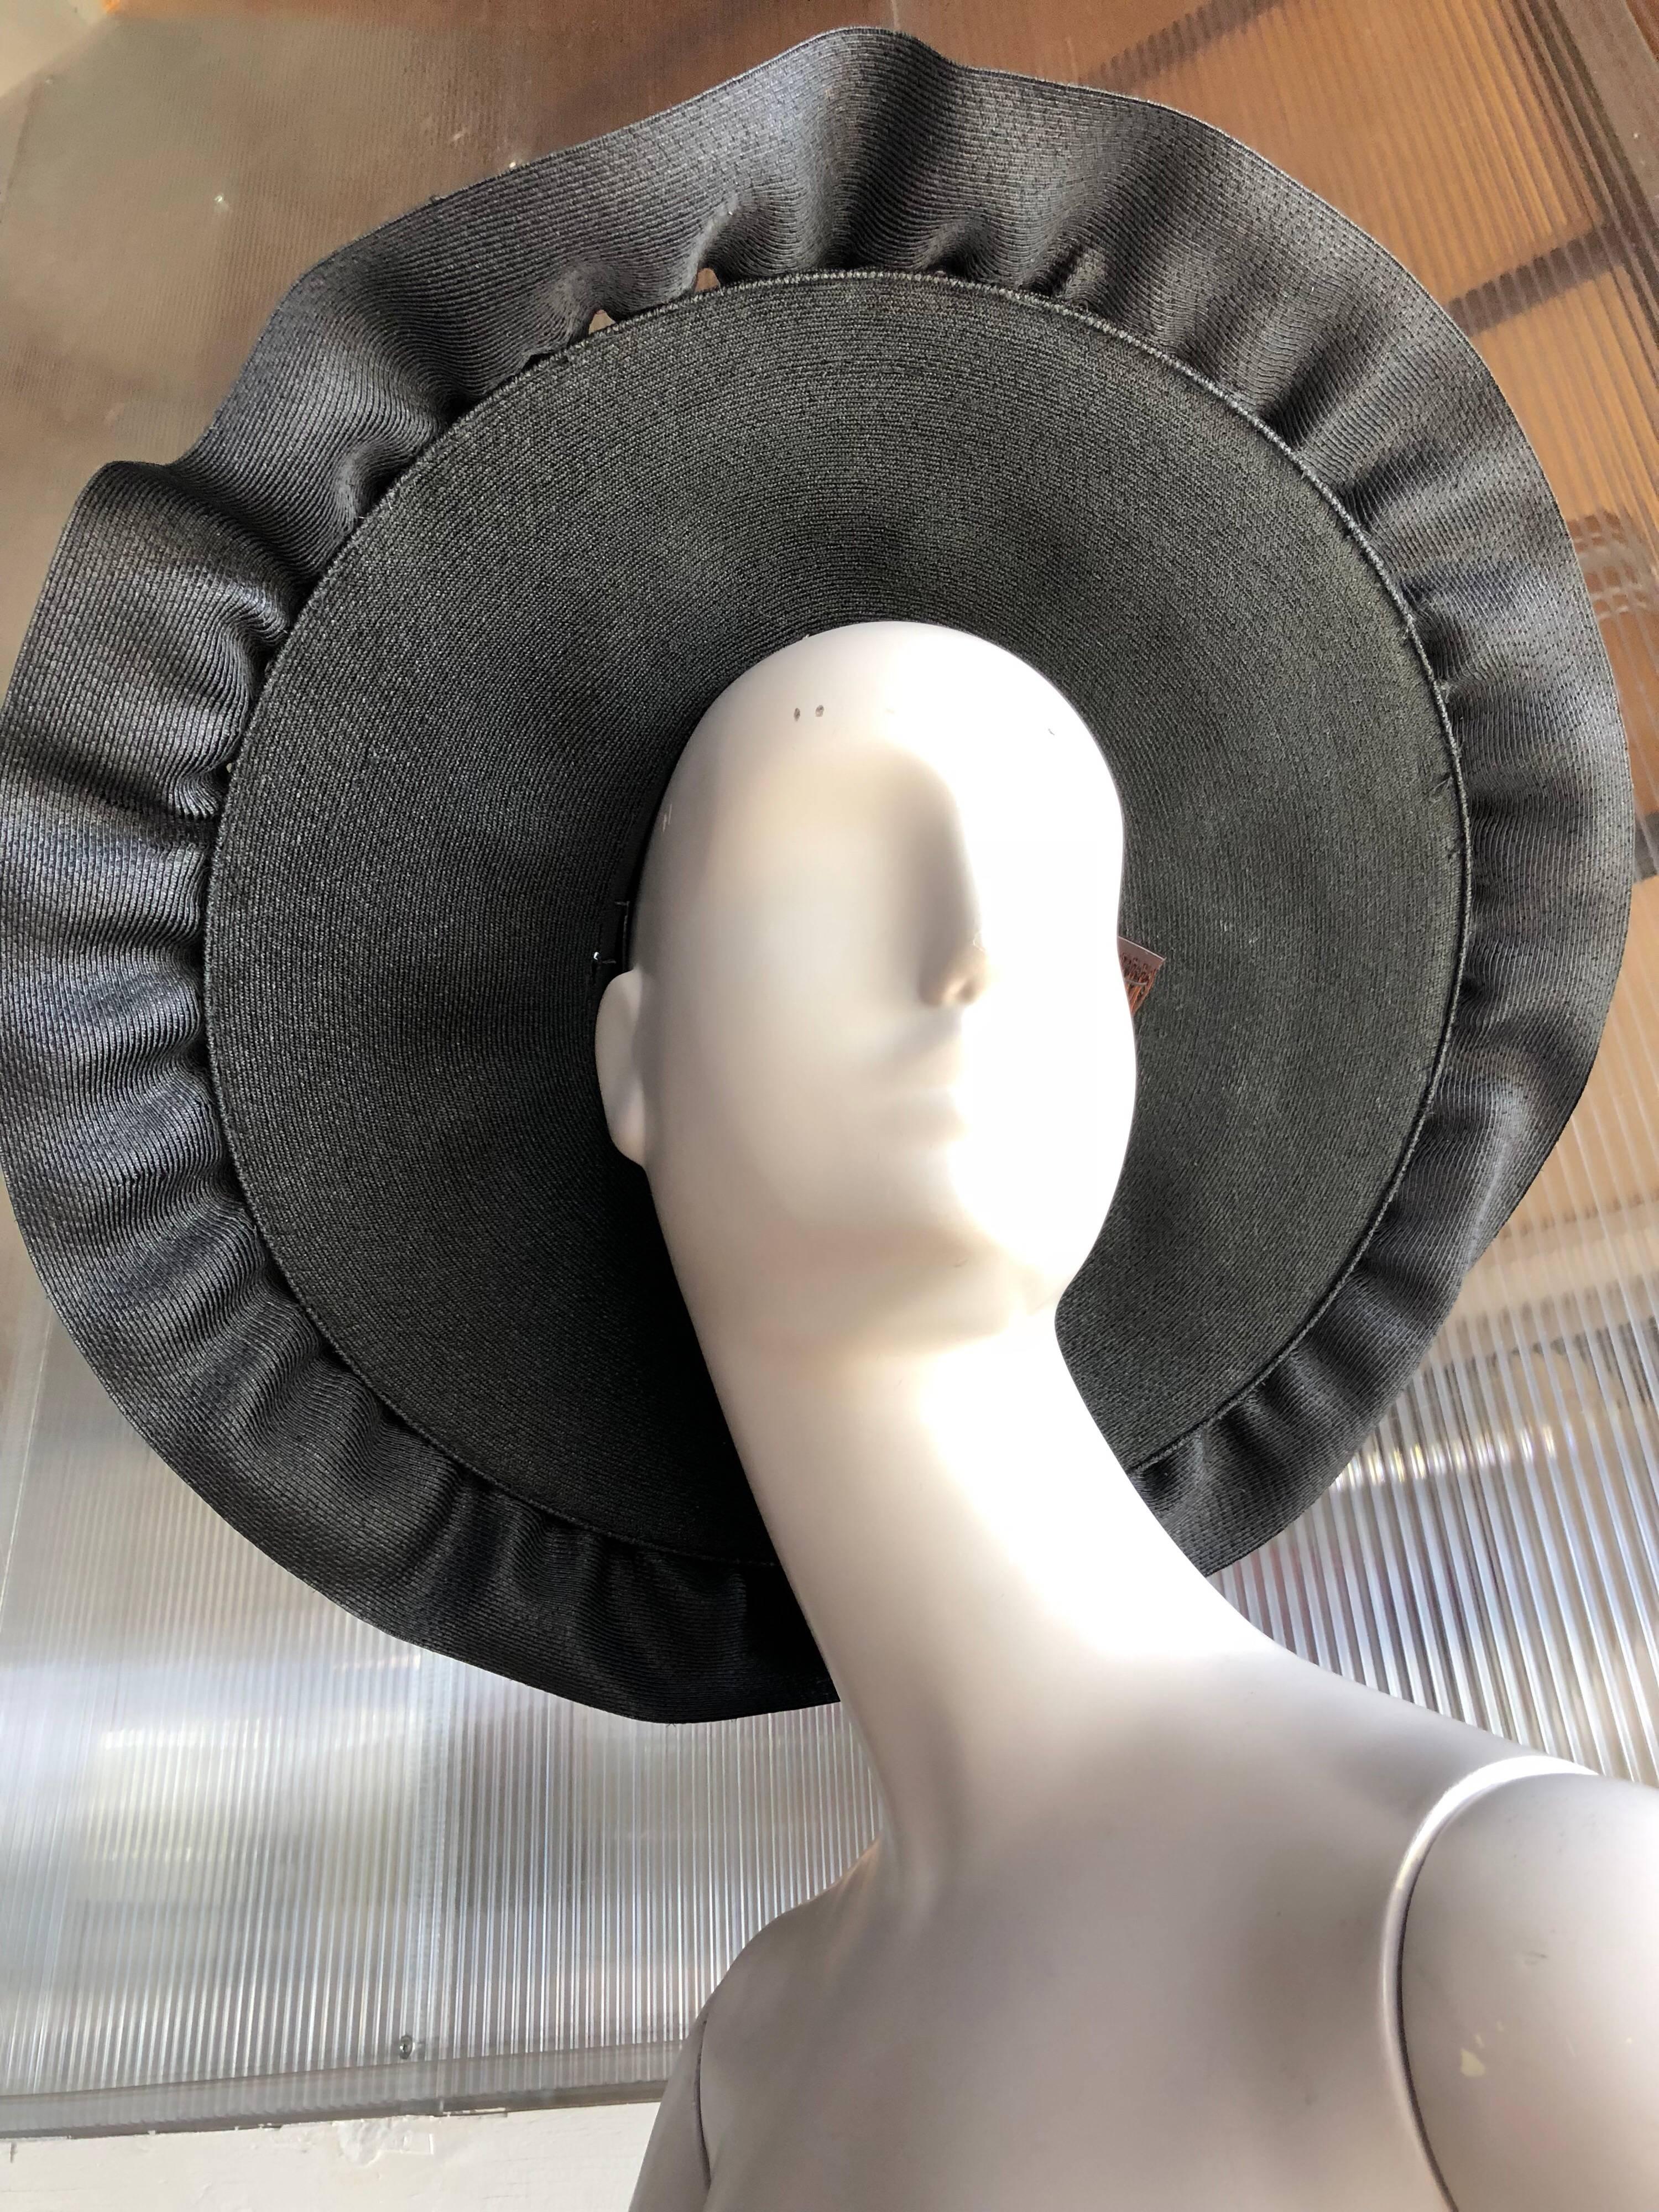 A 1940s Irina Roublon large and dramatic black straw hat with ruffled straw at brim and steel blue satin lining inside crown.  Crown opening is small and is meant to perch on head and be secured with 3 original attached combs, not to be worn fitted